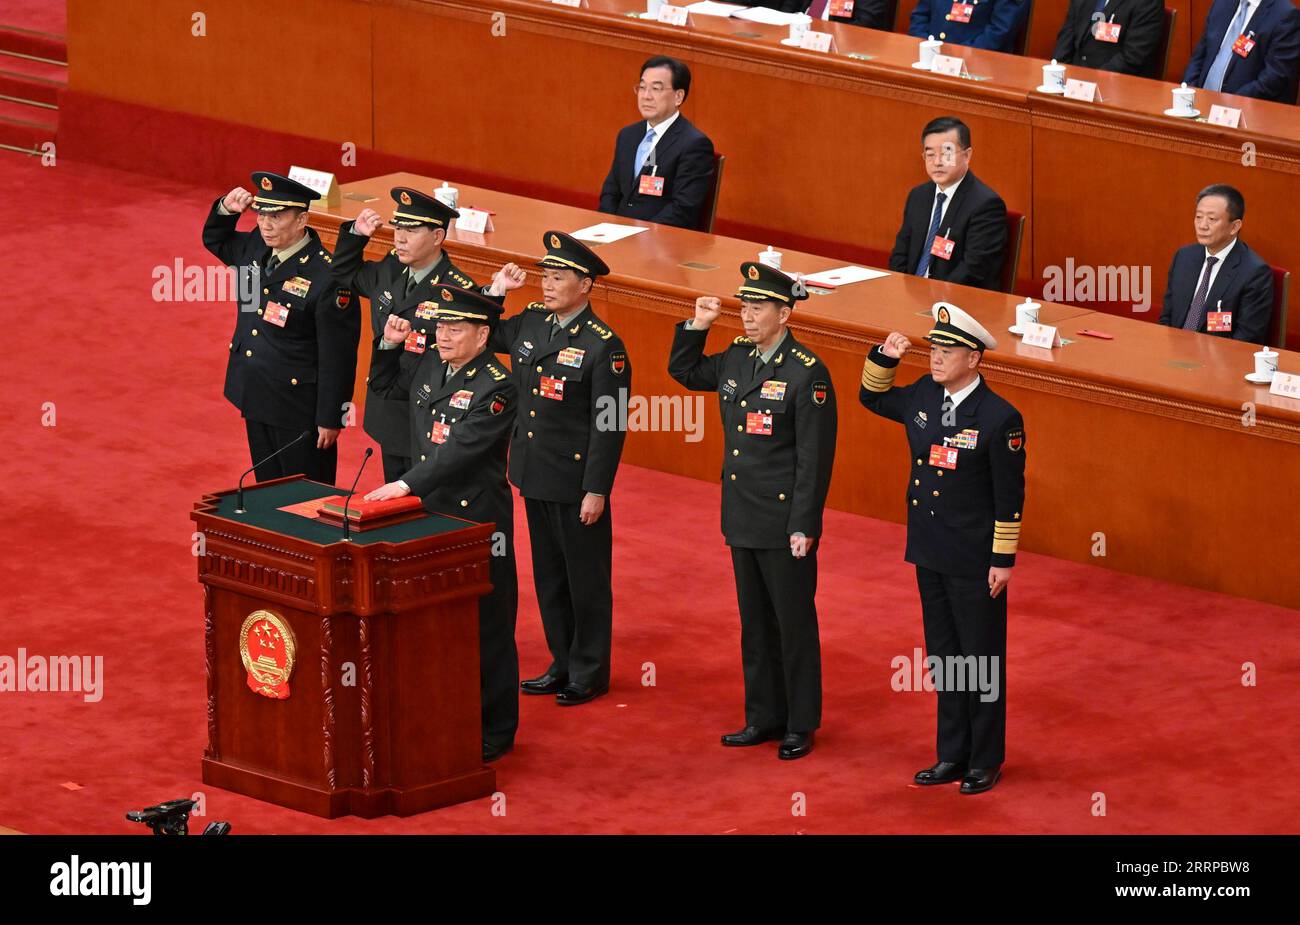 230311 -- BEIJING, March 11, 2023 -- Vice chairmen and members of the Central Military Commission CMC of the People s Republic of China PRC pledge allegiance to the Constitution at the Great Hall of the People in Beijing, capital of China, March 11, 2023. Zhang Youxia and He Weidong were endorsed as the PRC CMC vice chairmen, and Li Shangfu, Liu Zhenli, Miao Hua and Zhang Shengmin as the PRC CMC members at a plenary meeting of the first session of the 14th National People s Congress. Nearly 3,000 deputies to the 14th National People s Congress voted to approve the nomination by Xi Jinping, cha Stock Photo